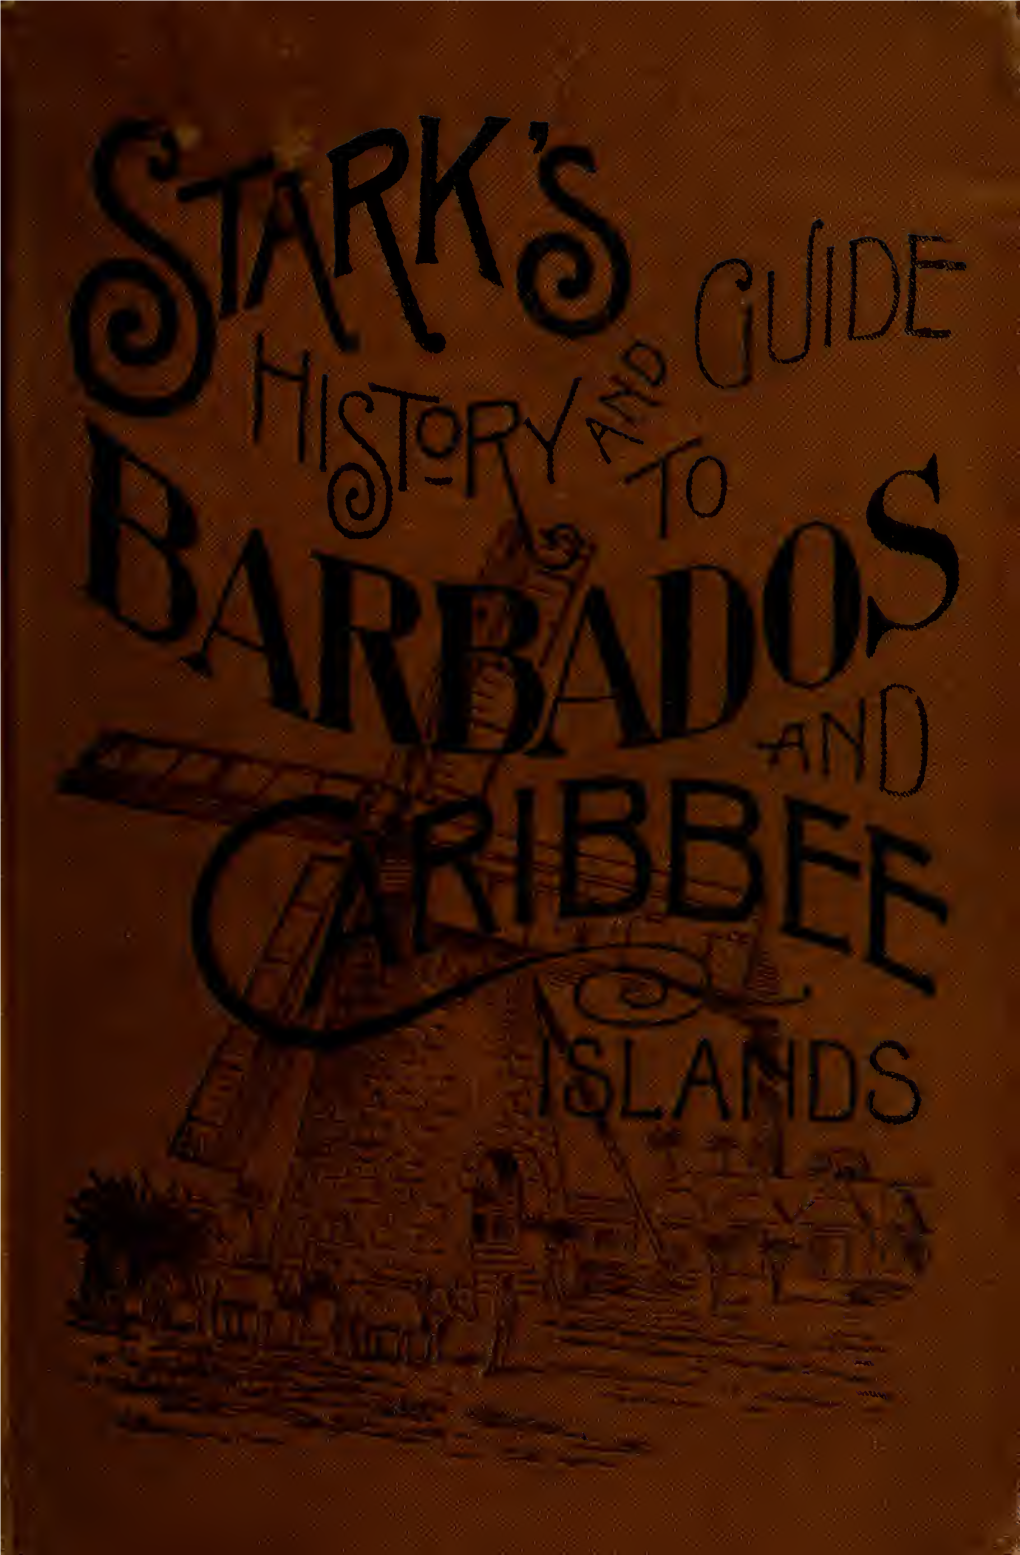 Stark's History and Guide to Barbados and the Caribbee Islands